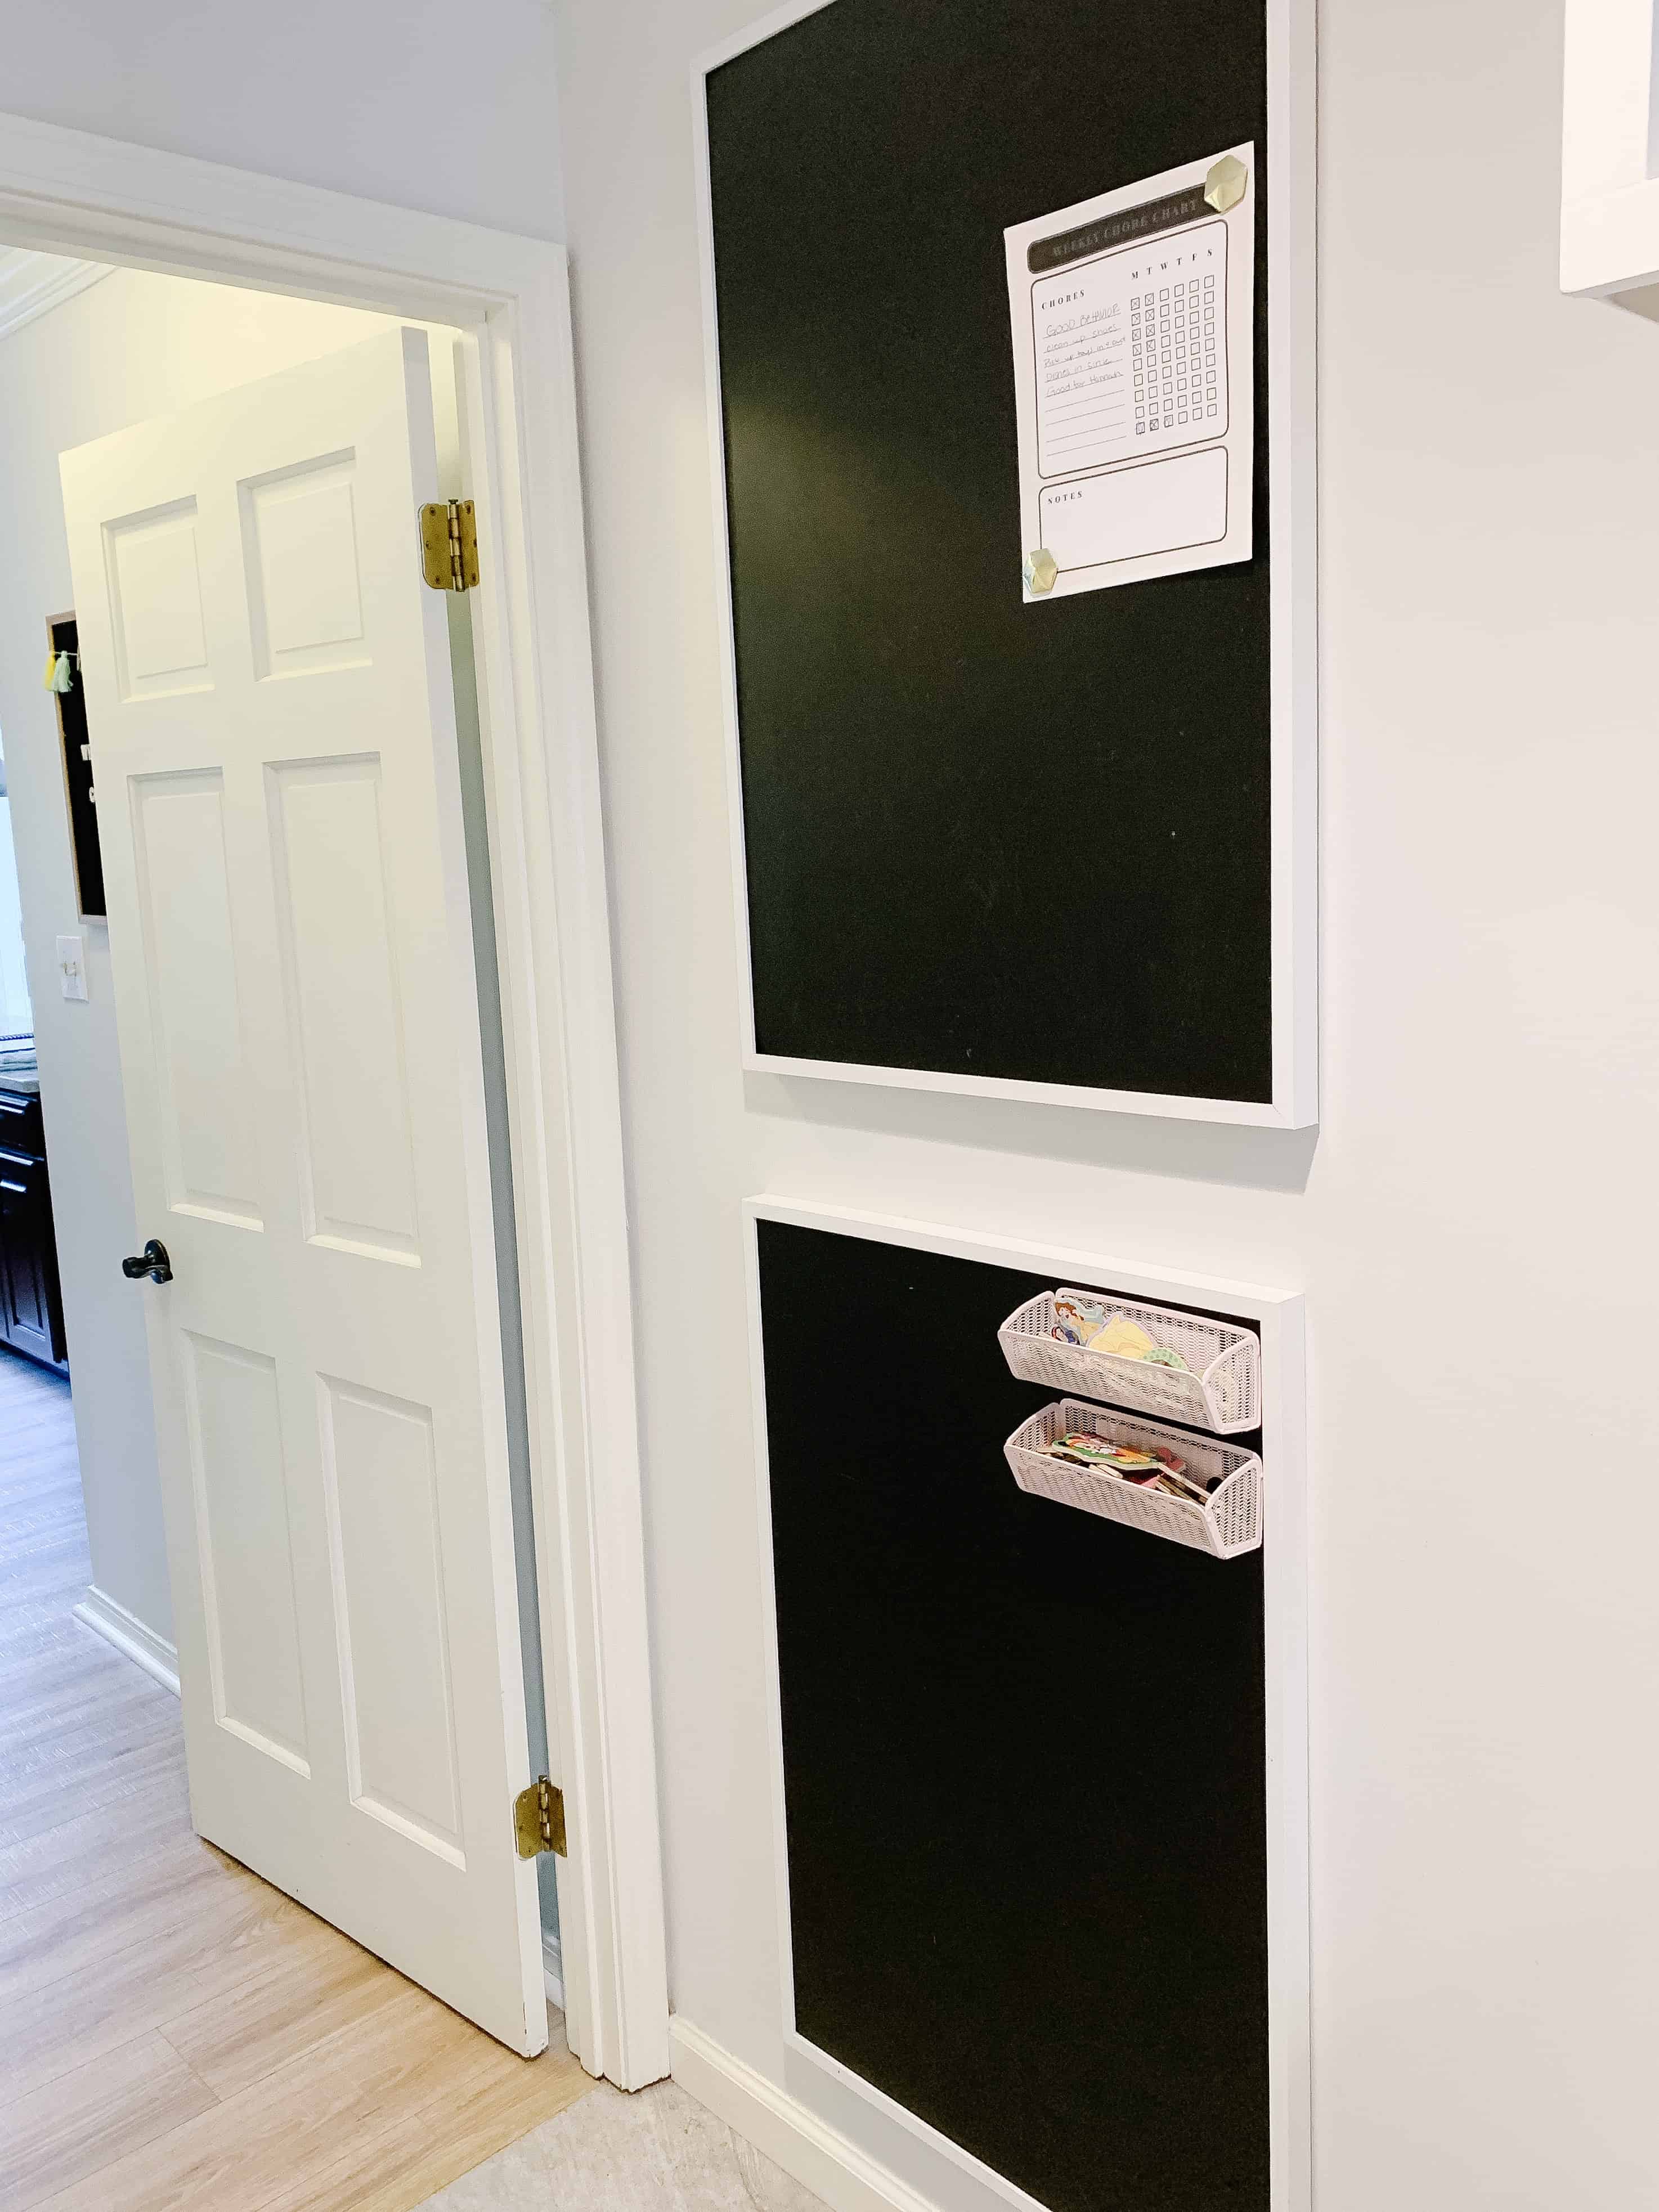 Laundry Room wall with Large Framed Chalkboards